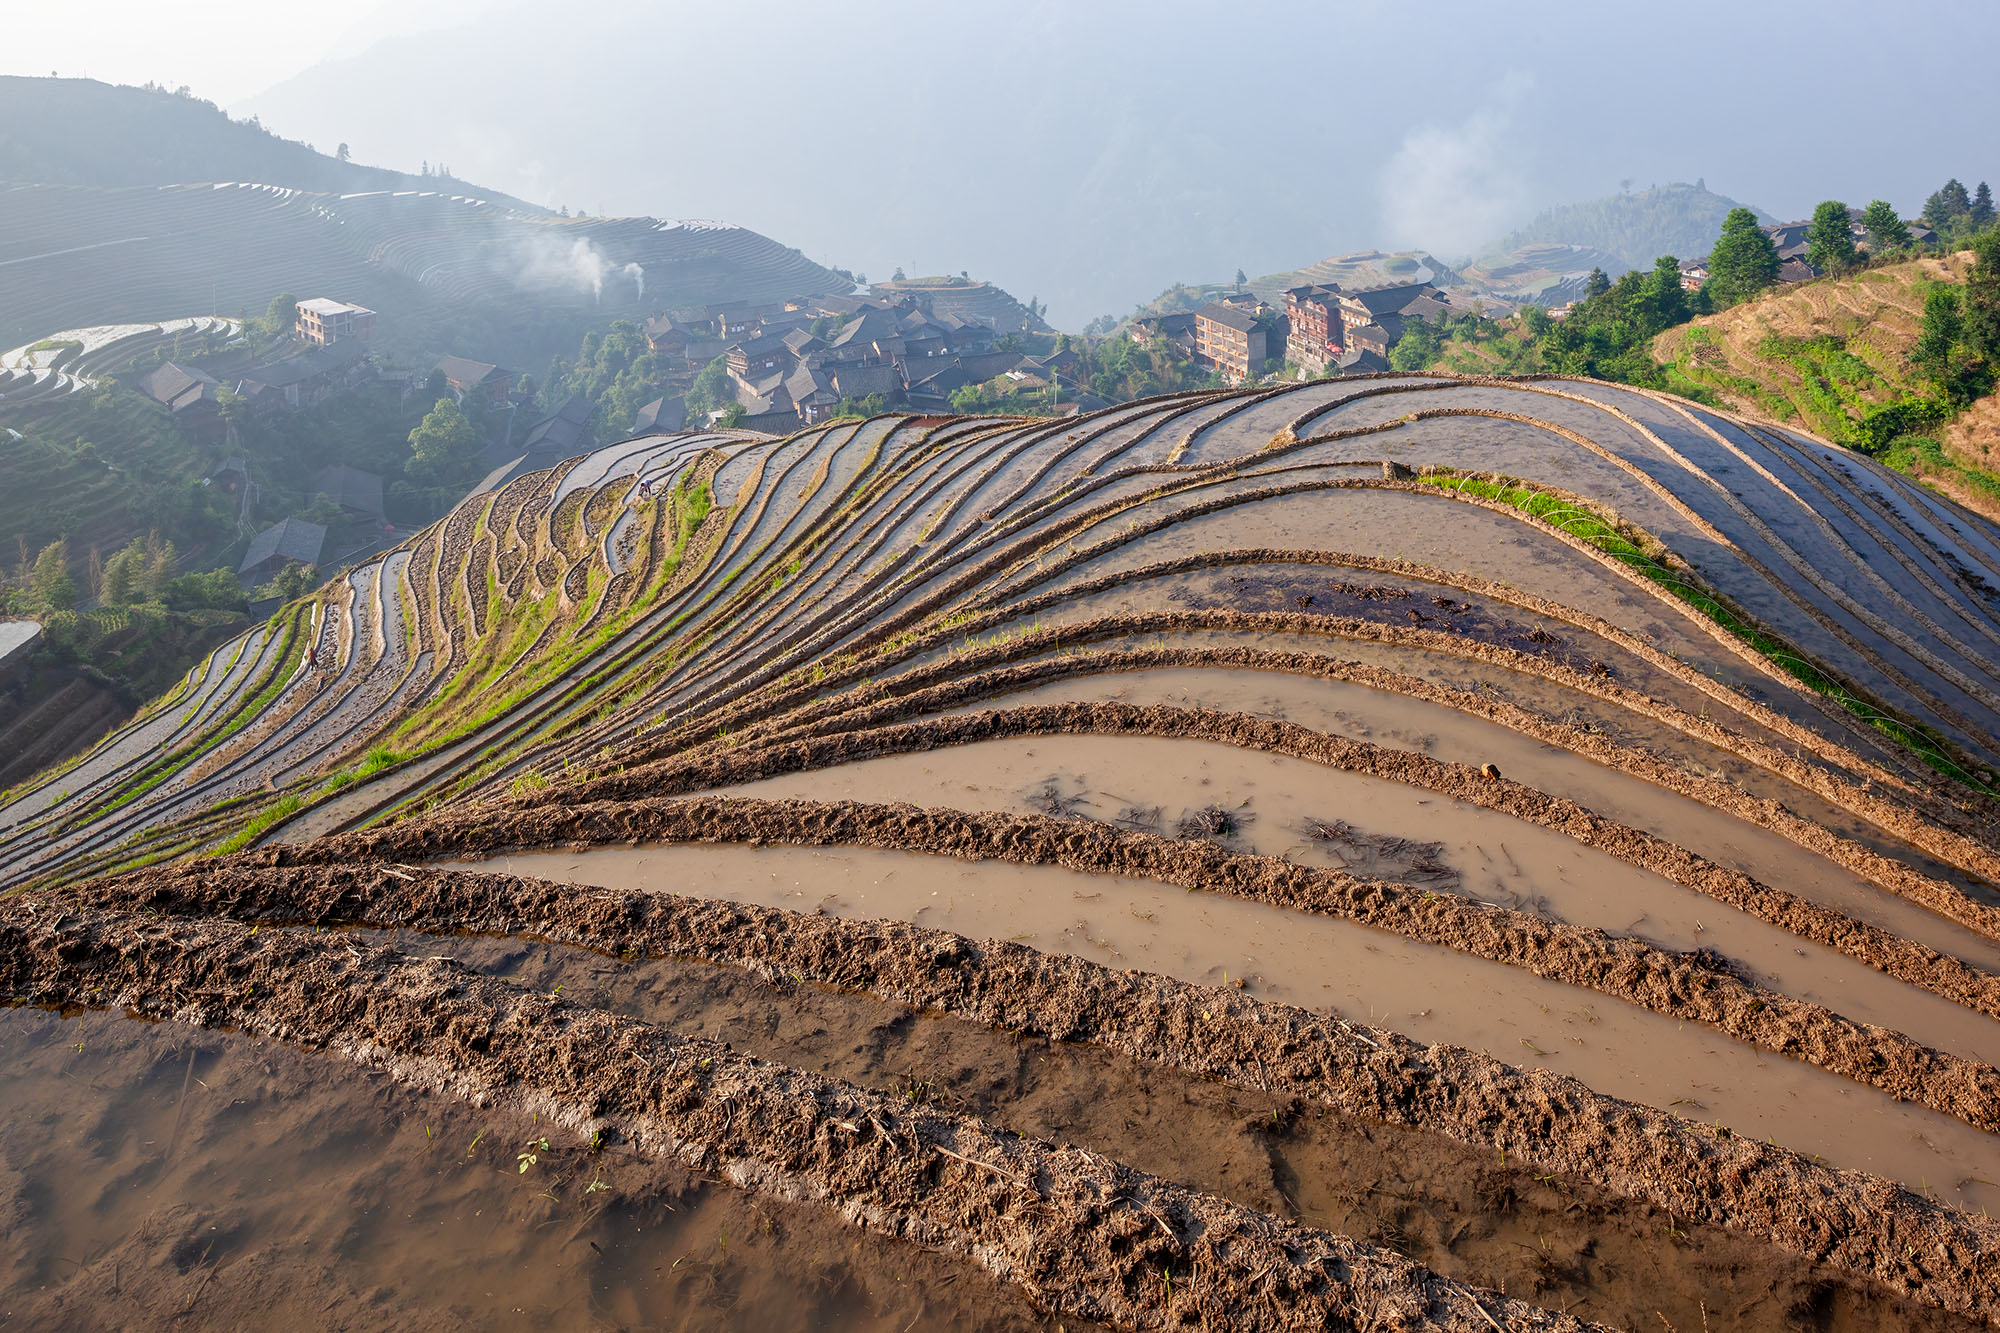 This photograph captures the groundwork in progress at the Longji Rice Terraces in Ping'an, Guangxi, China. In the foreground...